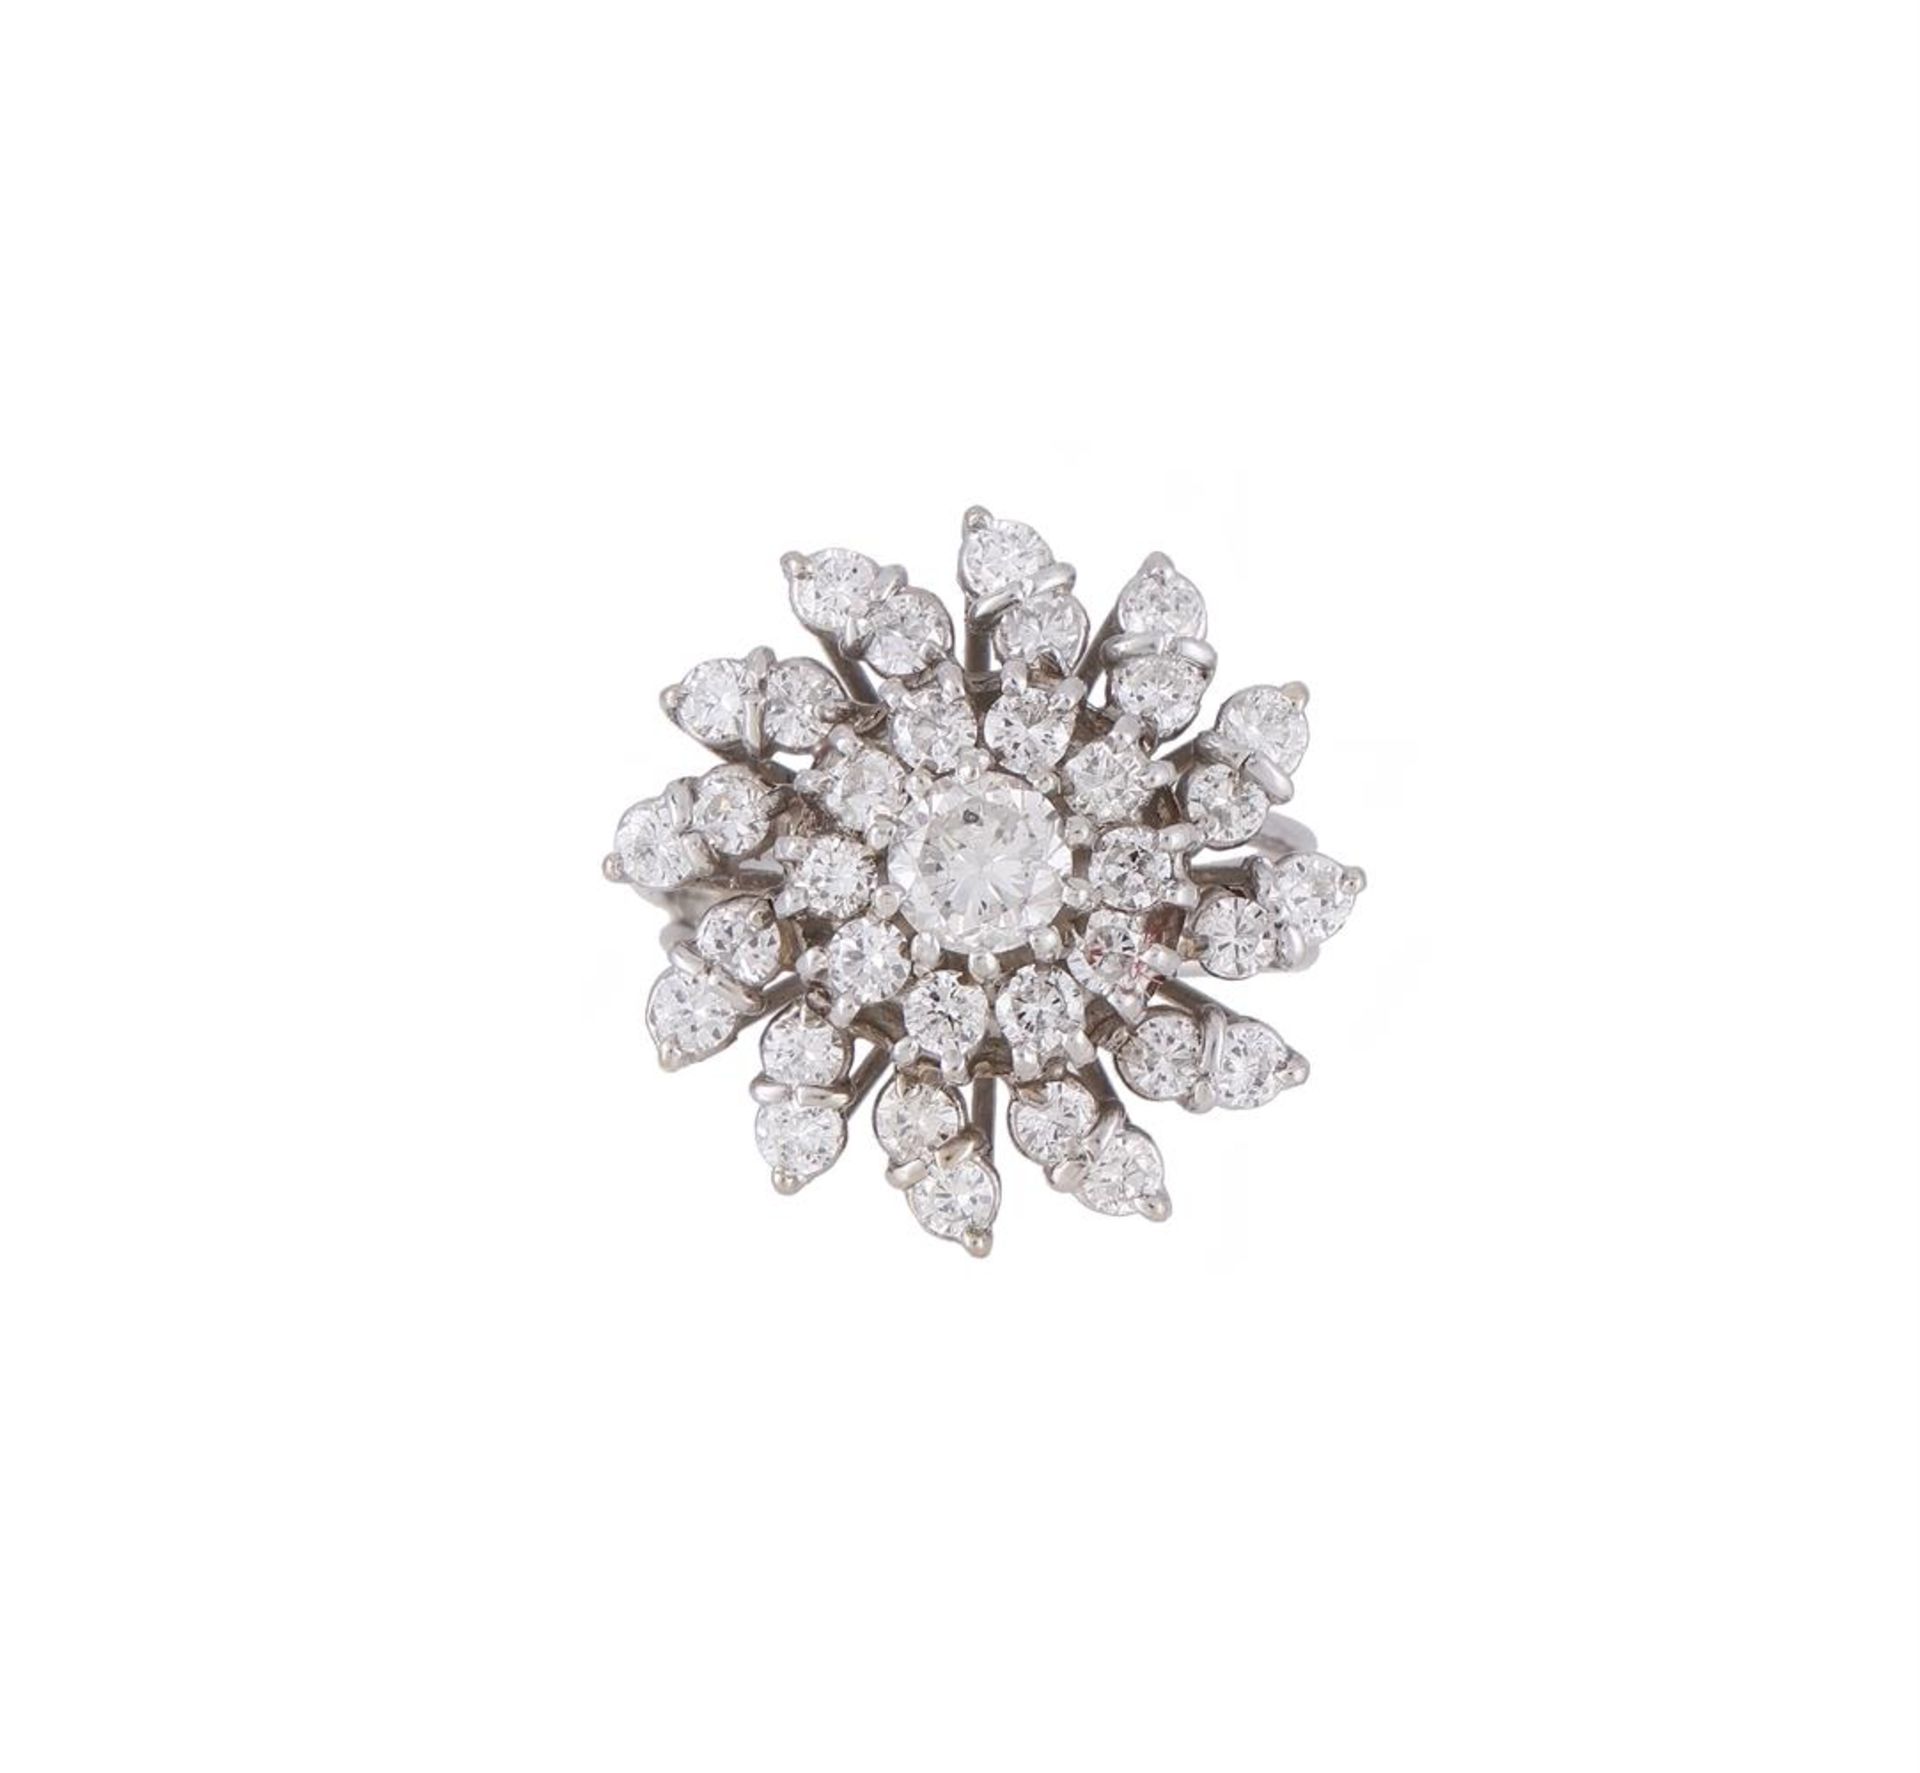 A DIAMOND RADIATING CLUSTER RING